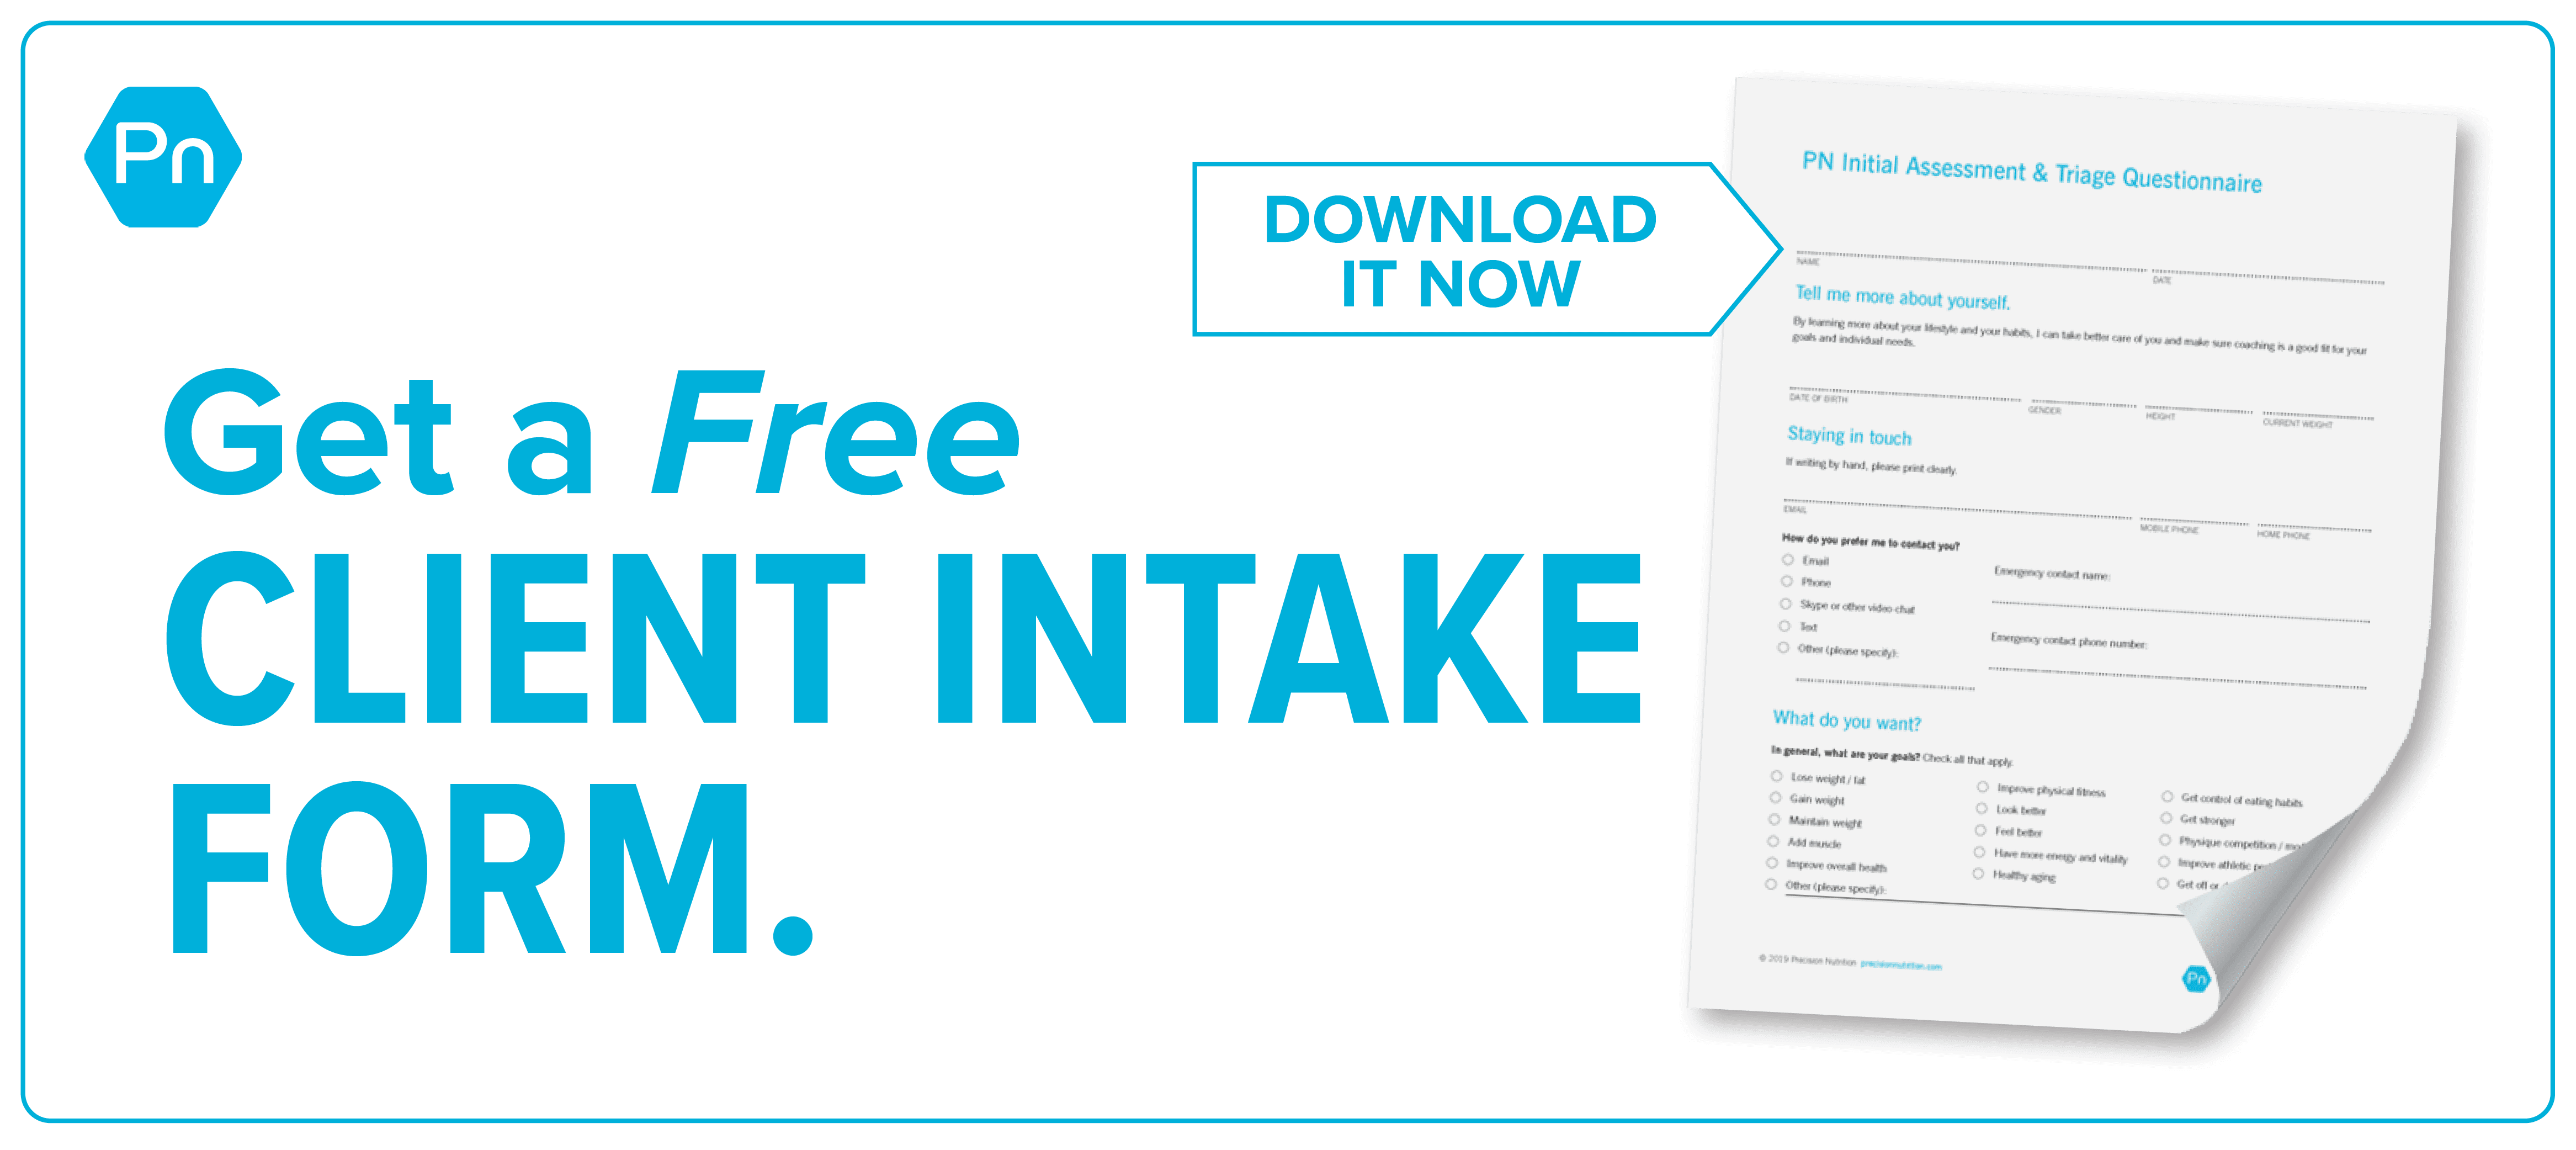 Get a free client intake form.